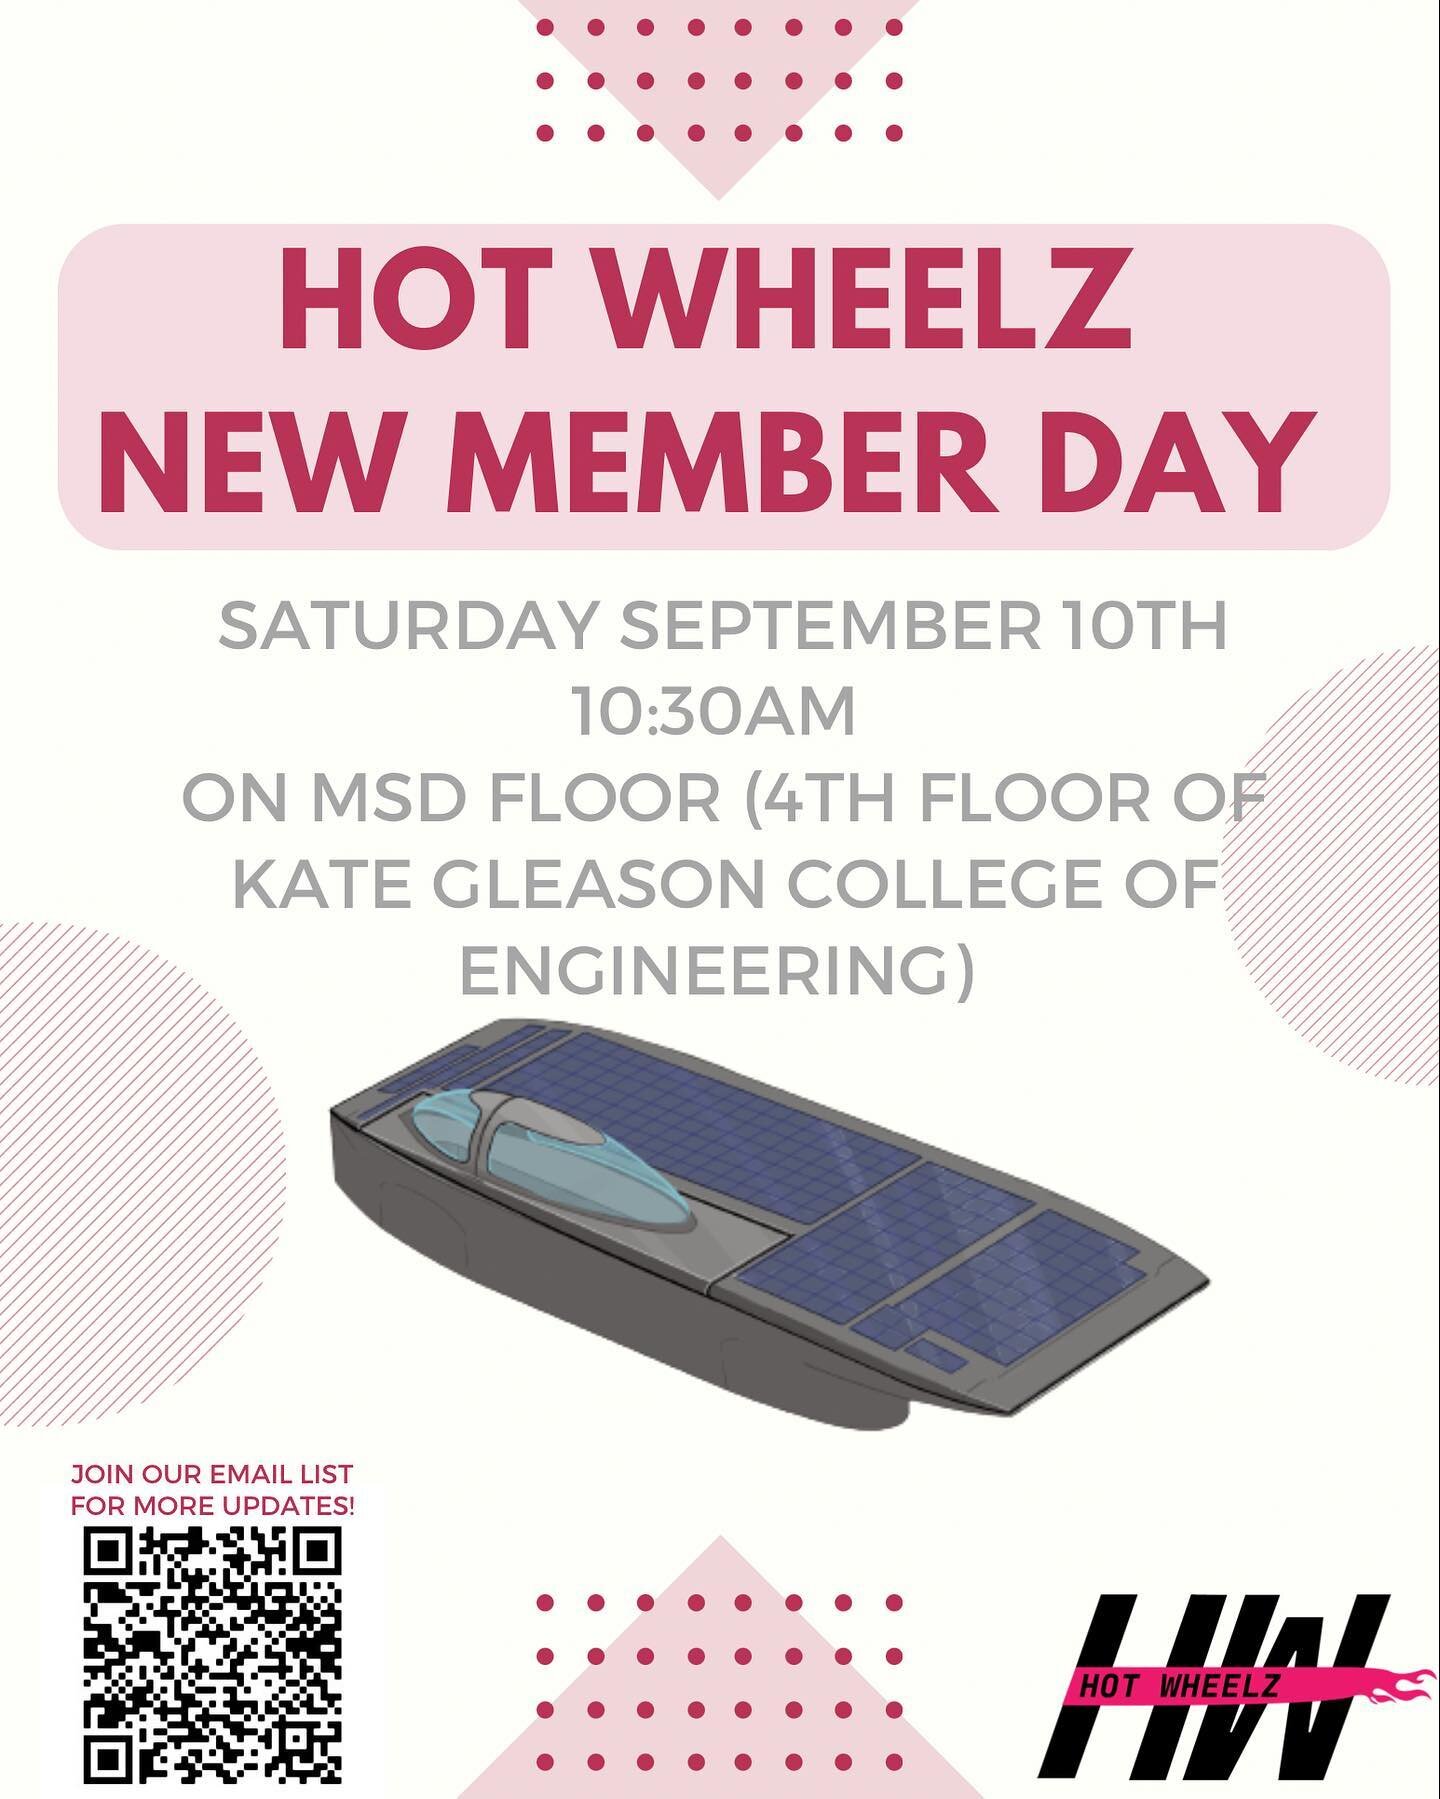 Come to our new member day Saturday September 10th. Meet us on the MSD Floor in KGCOE at 10:30 (enter in from pi quad door and take the elevator or stairs at the entrance to the 4th floor). Join us and @ritbaja @rit_racing @rit.evt @ritcleansnow for 